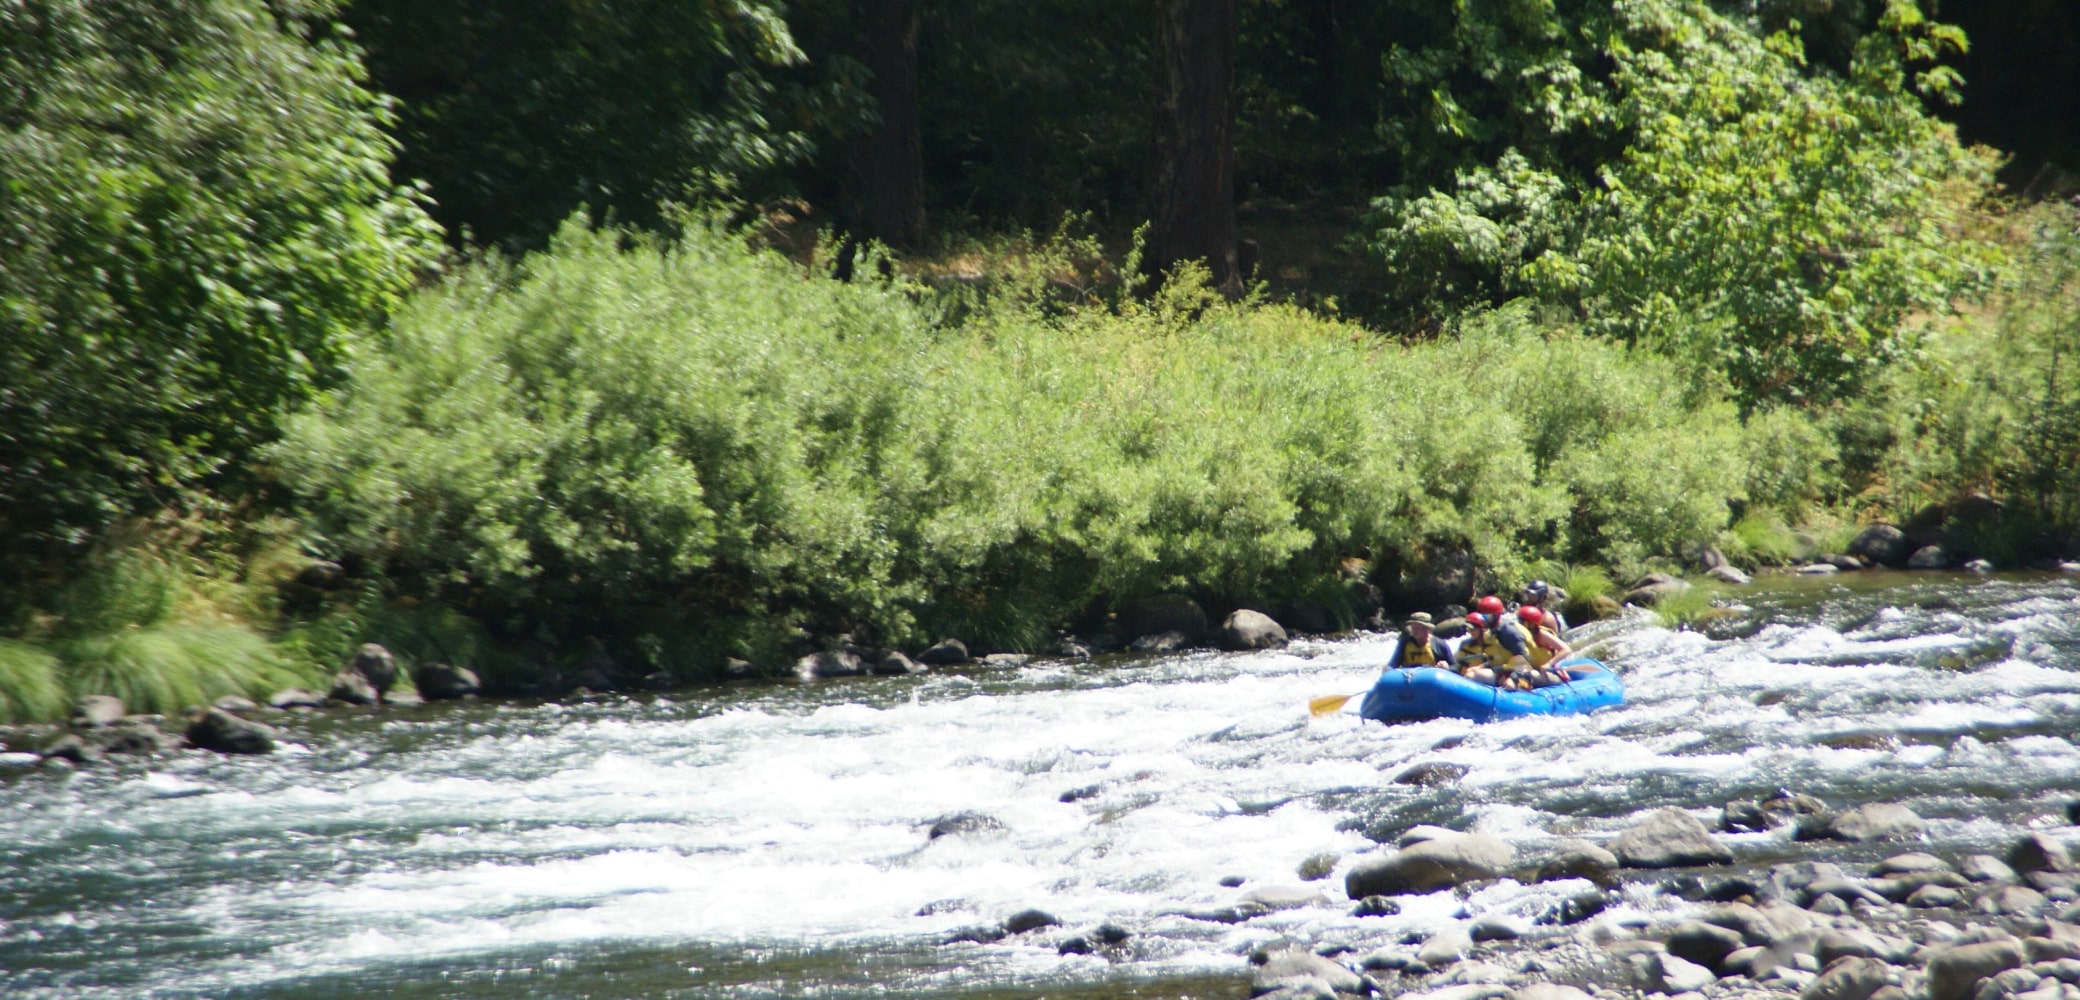 A group of white water rafters in a blue raft navigate rapids on the Sandy River.